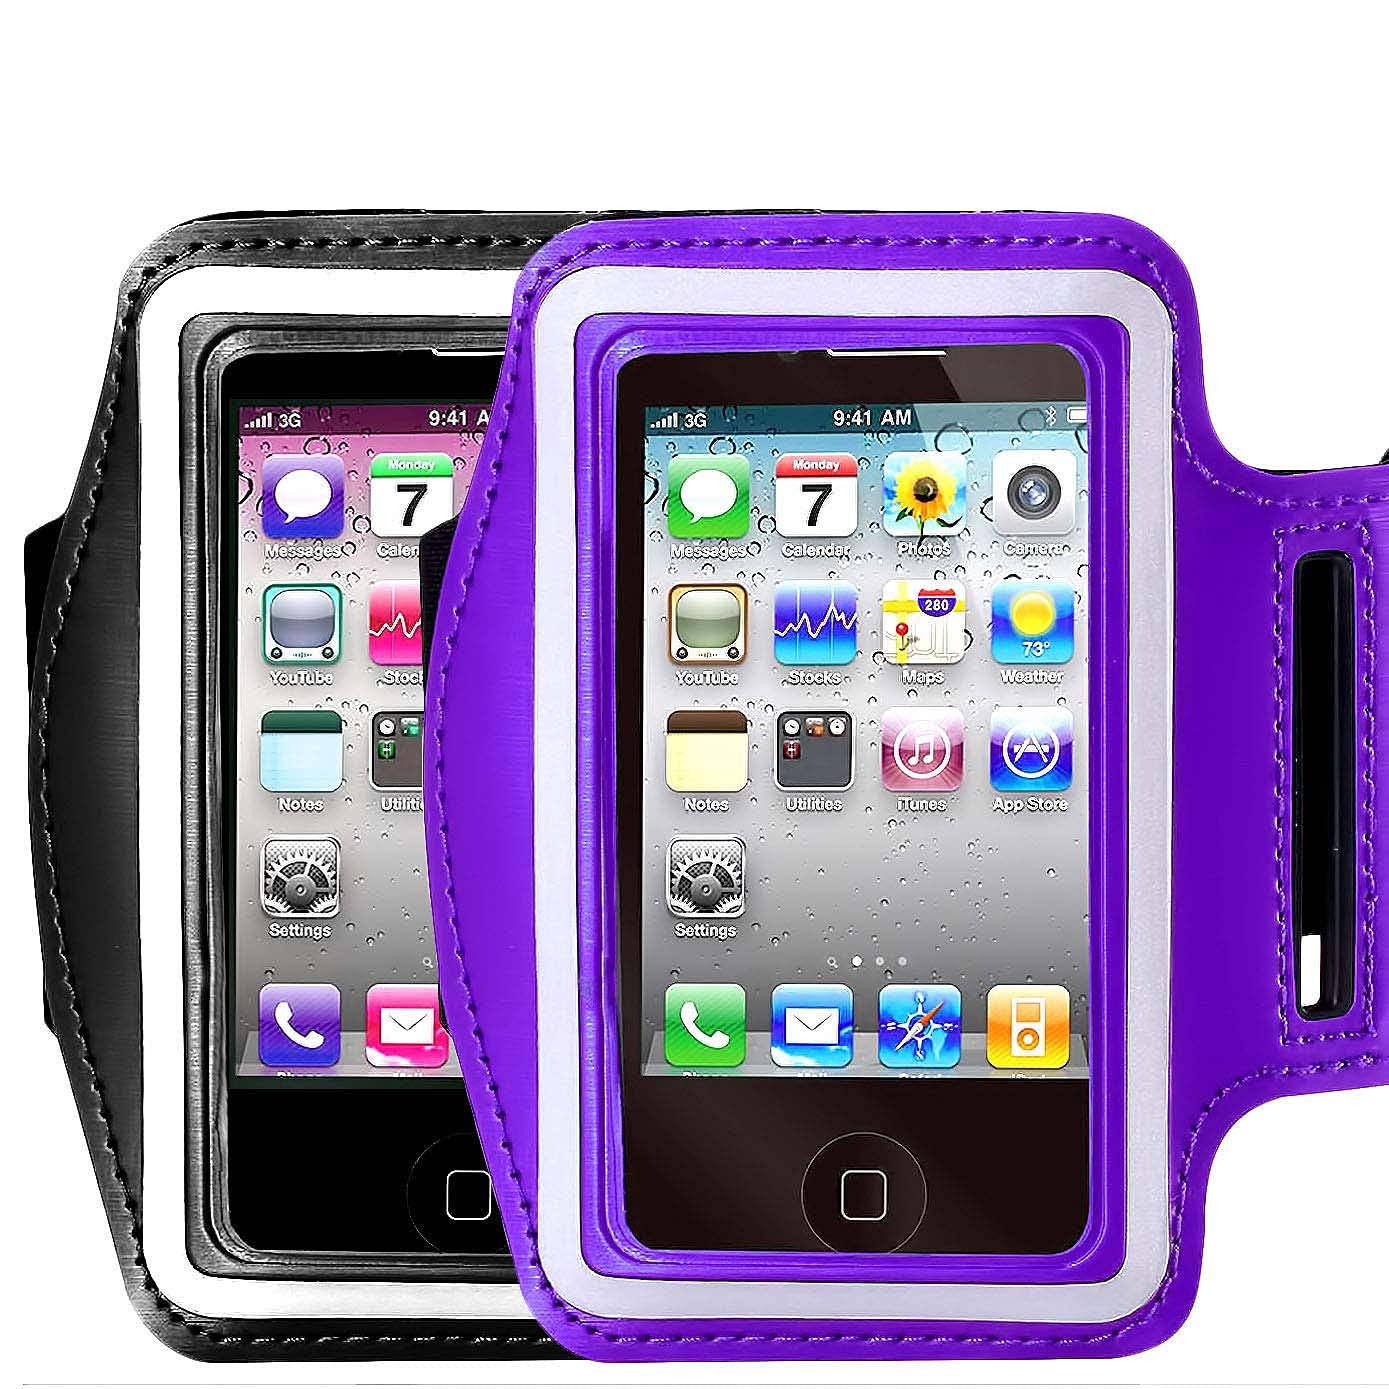 [2pack] Armband for iPhone X XS XR MAX 8/8plus/7/6/6S Plus,Samsung Galaxy S9 s8 s7 s6 Edge s8+,Note 5.etc.CaseHQ Adjustable Reflective Exercise Running Pouch Key Holder-Hiking,Biking(Black+Purple)